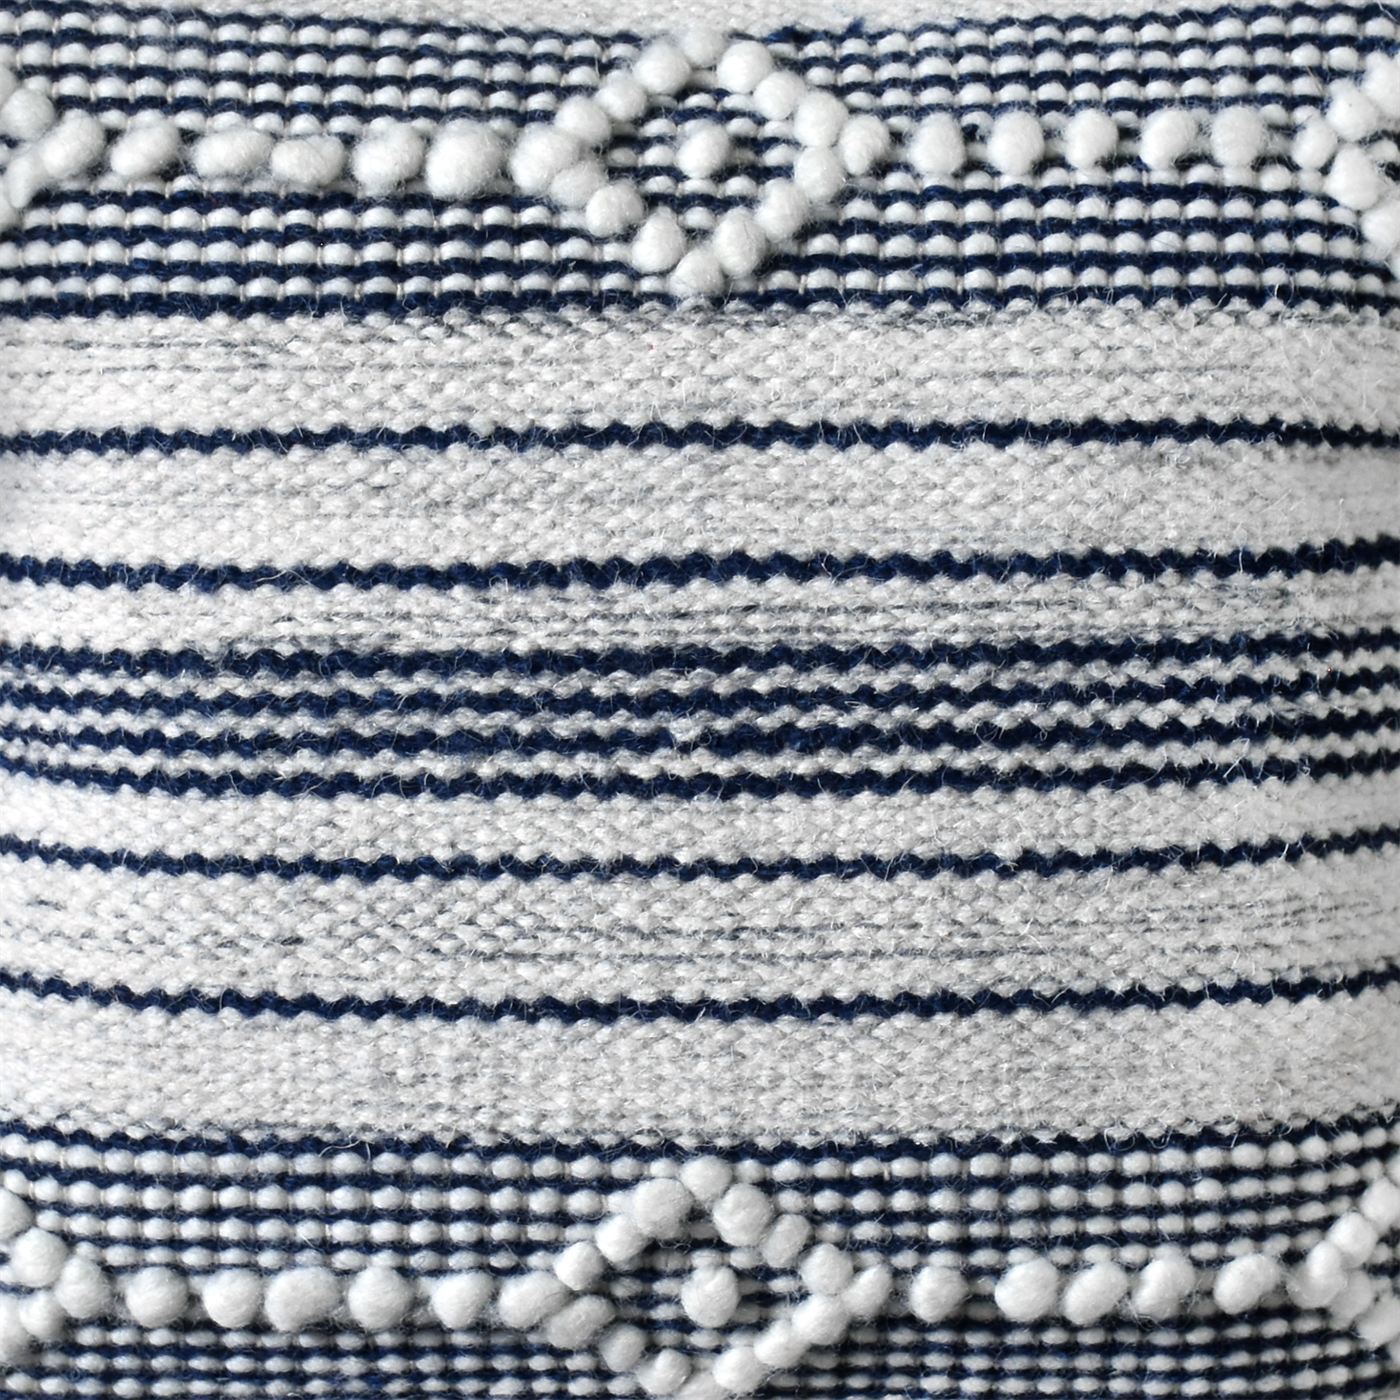 Oster Pillow, Wool, Natural White, Blue, Pitloom, All Loop